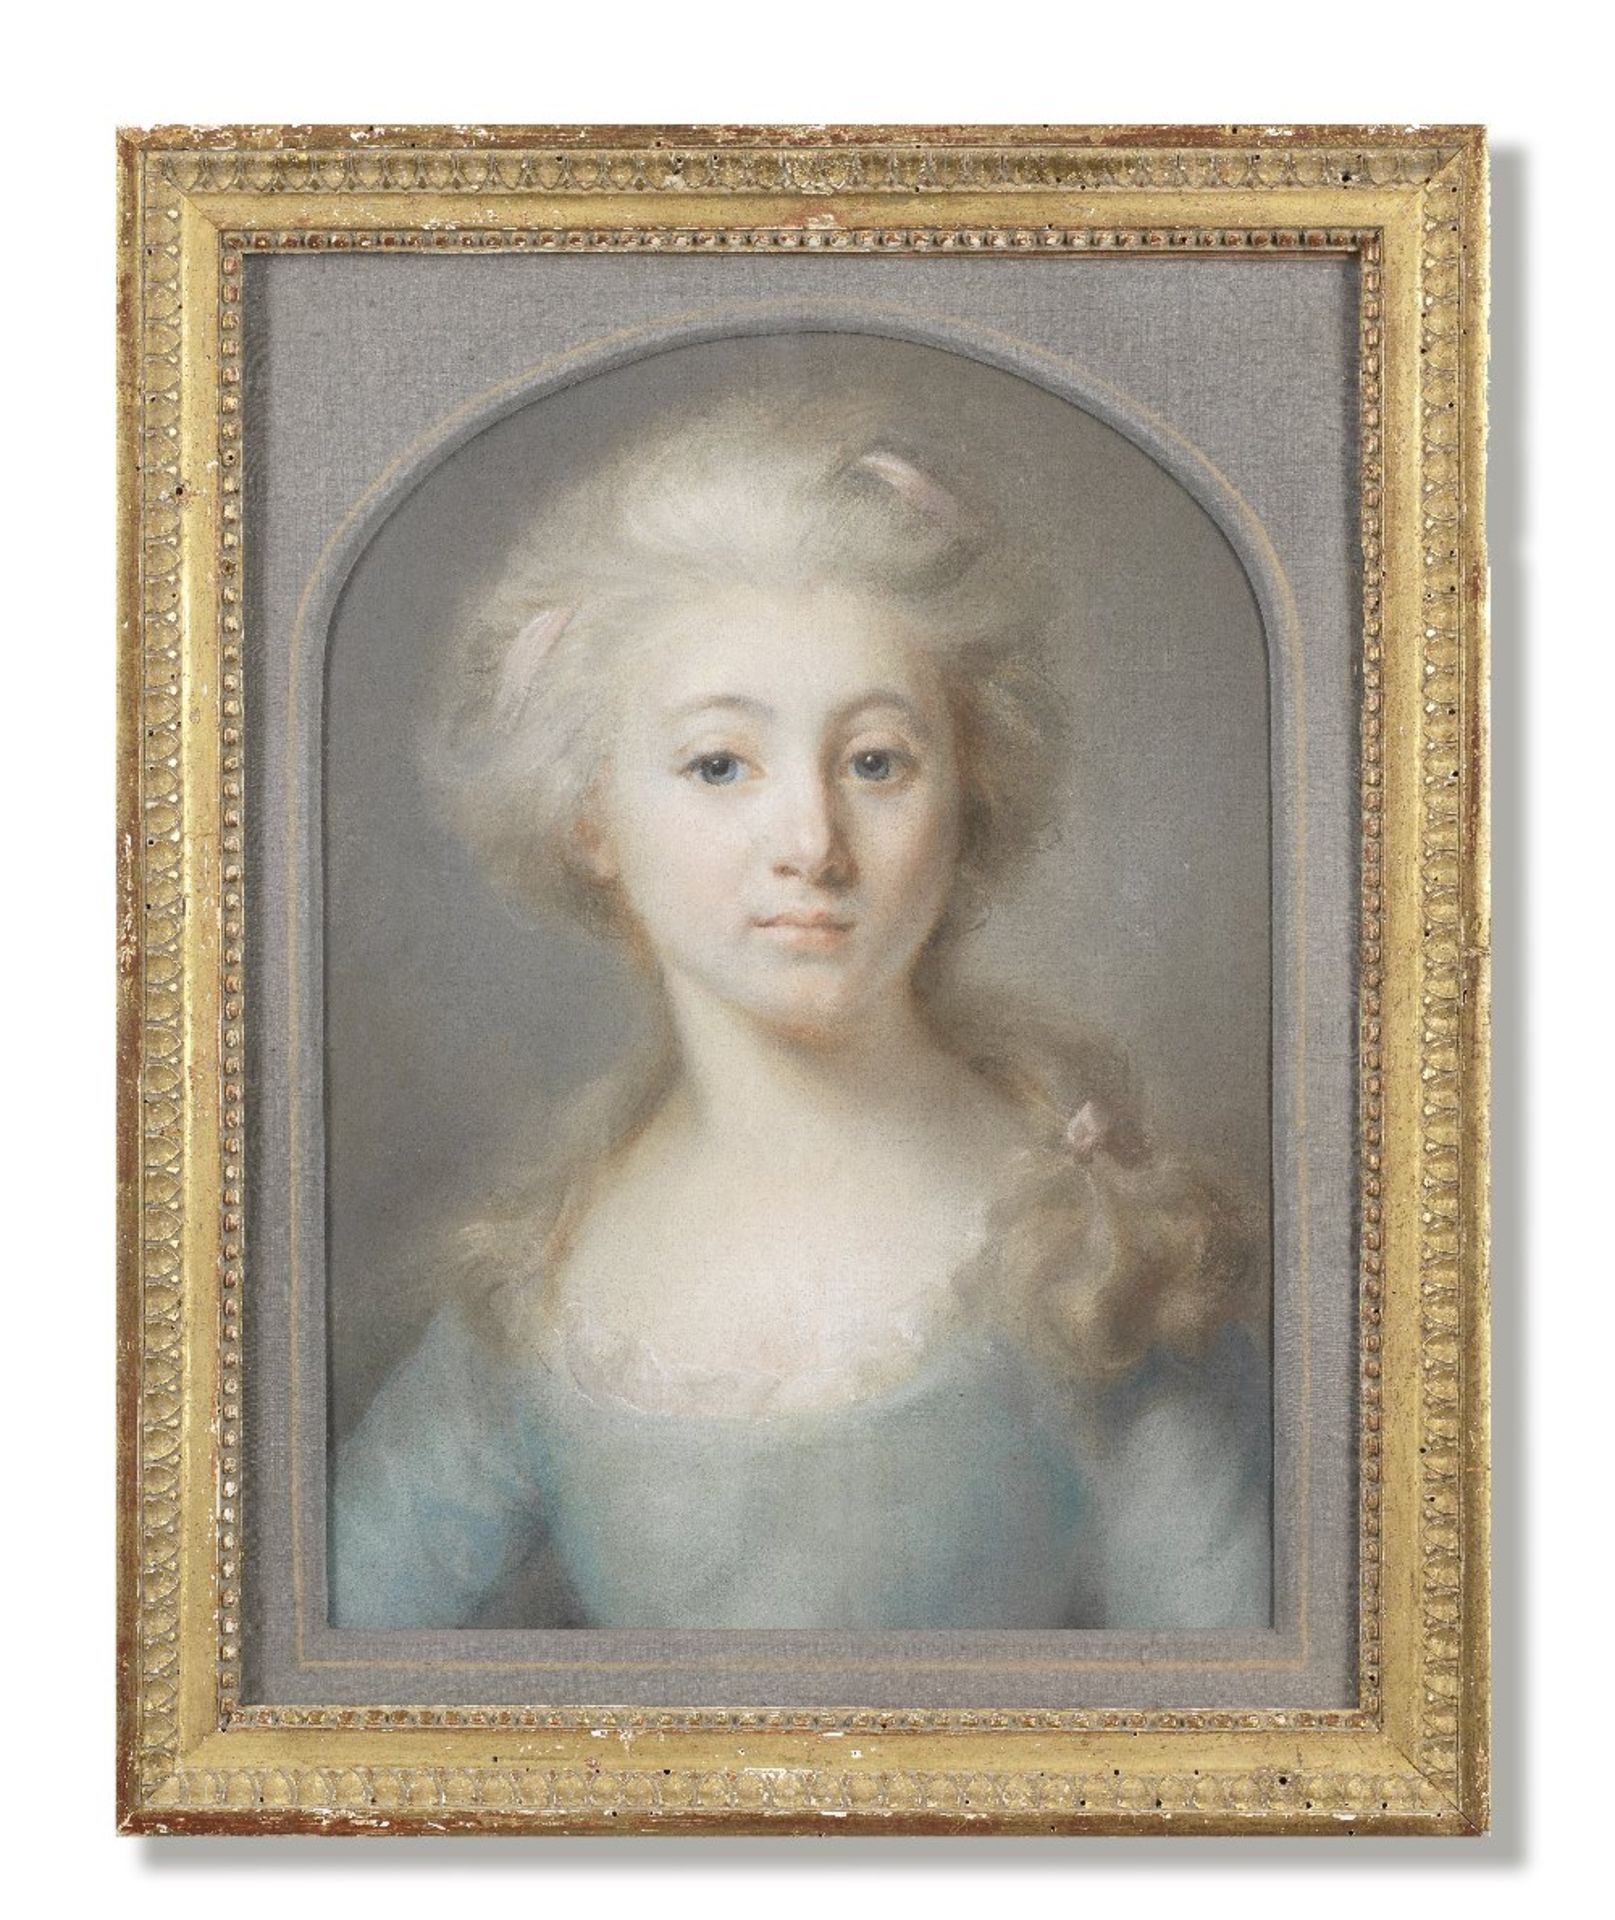 French School, 18th Century Portrait of a girl, said to be from the Luglen van Tuyll family, bus...